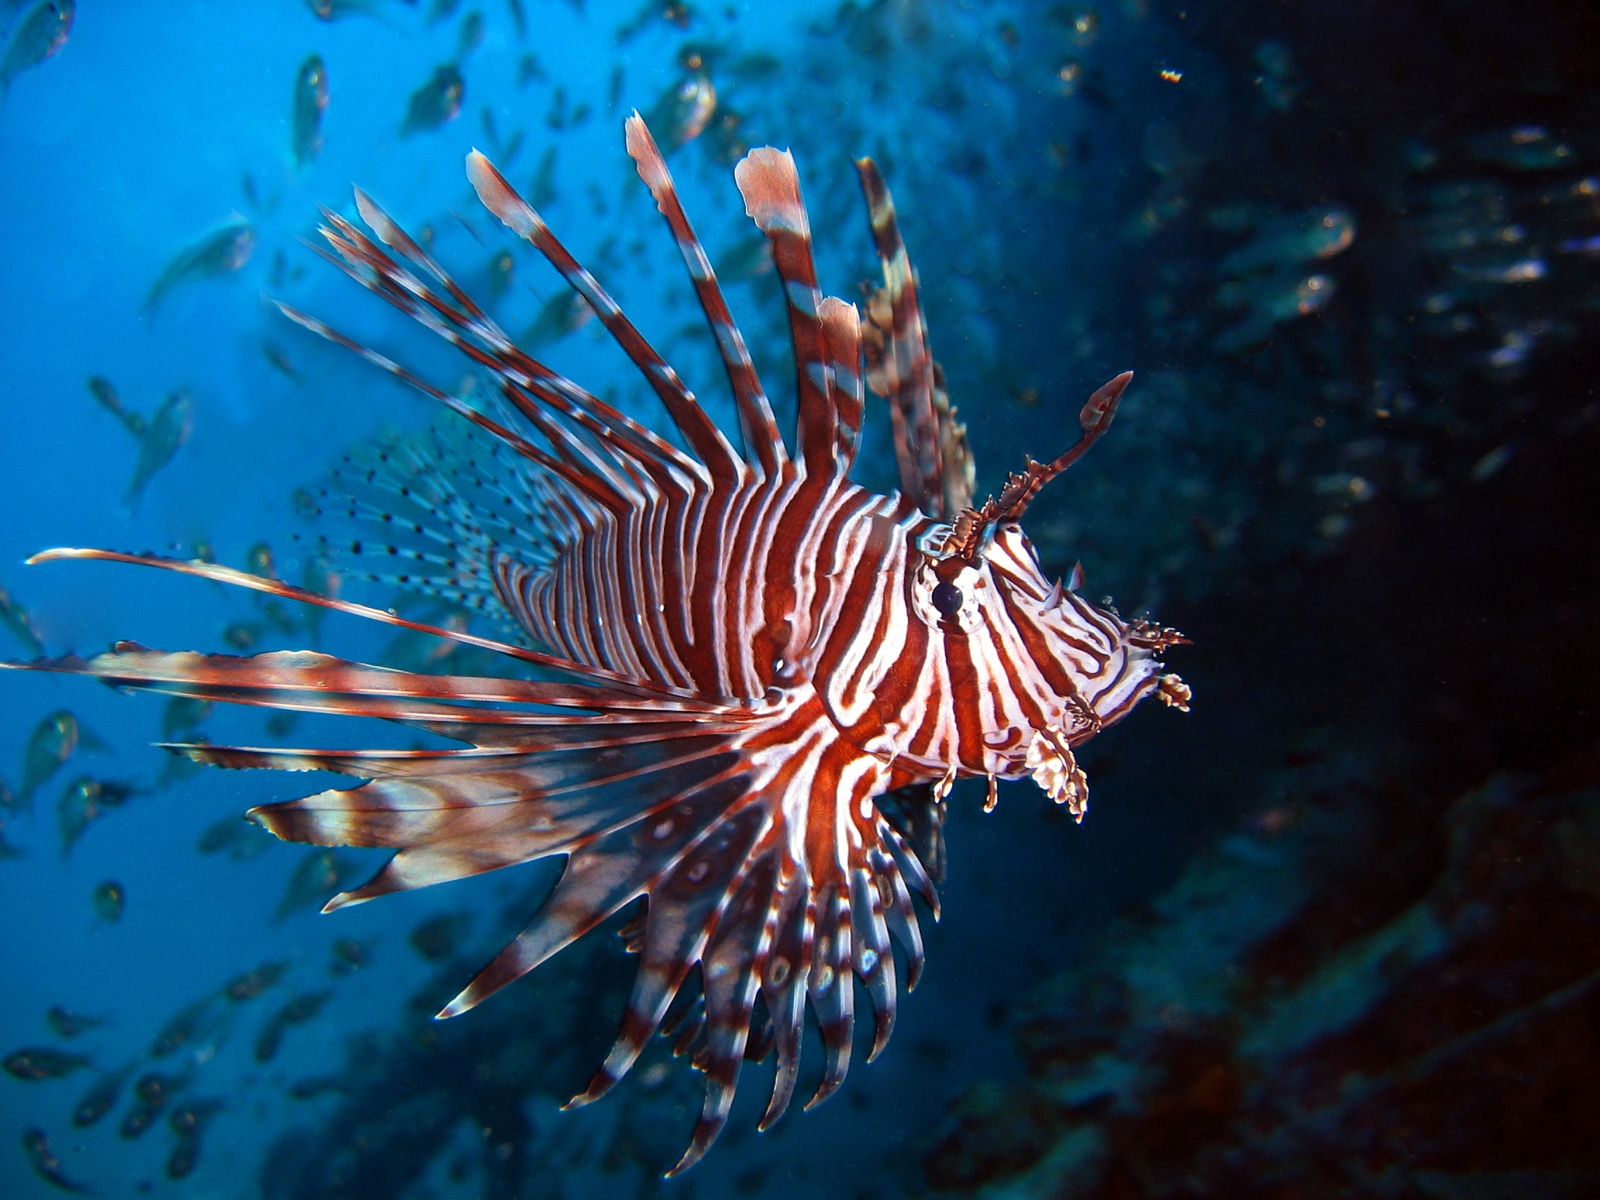 The Lion Fish is a problem to the coral reefs of Bonaire.